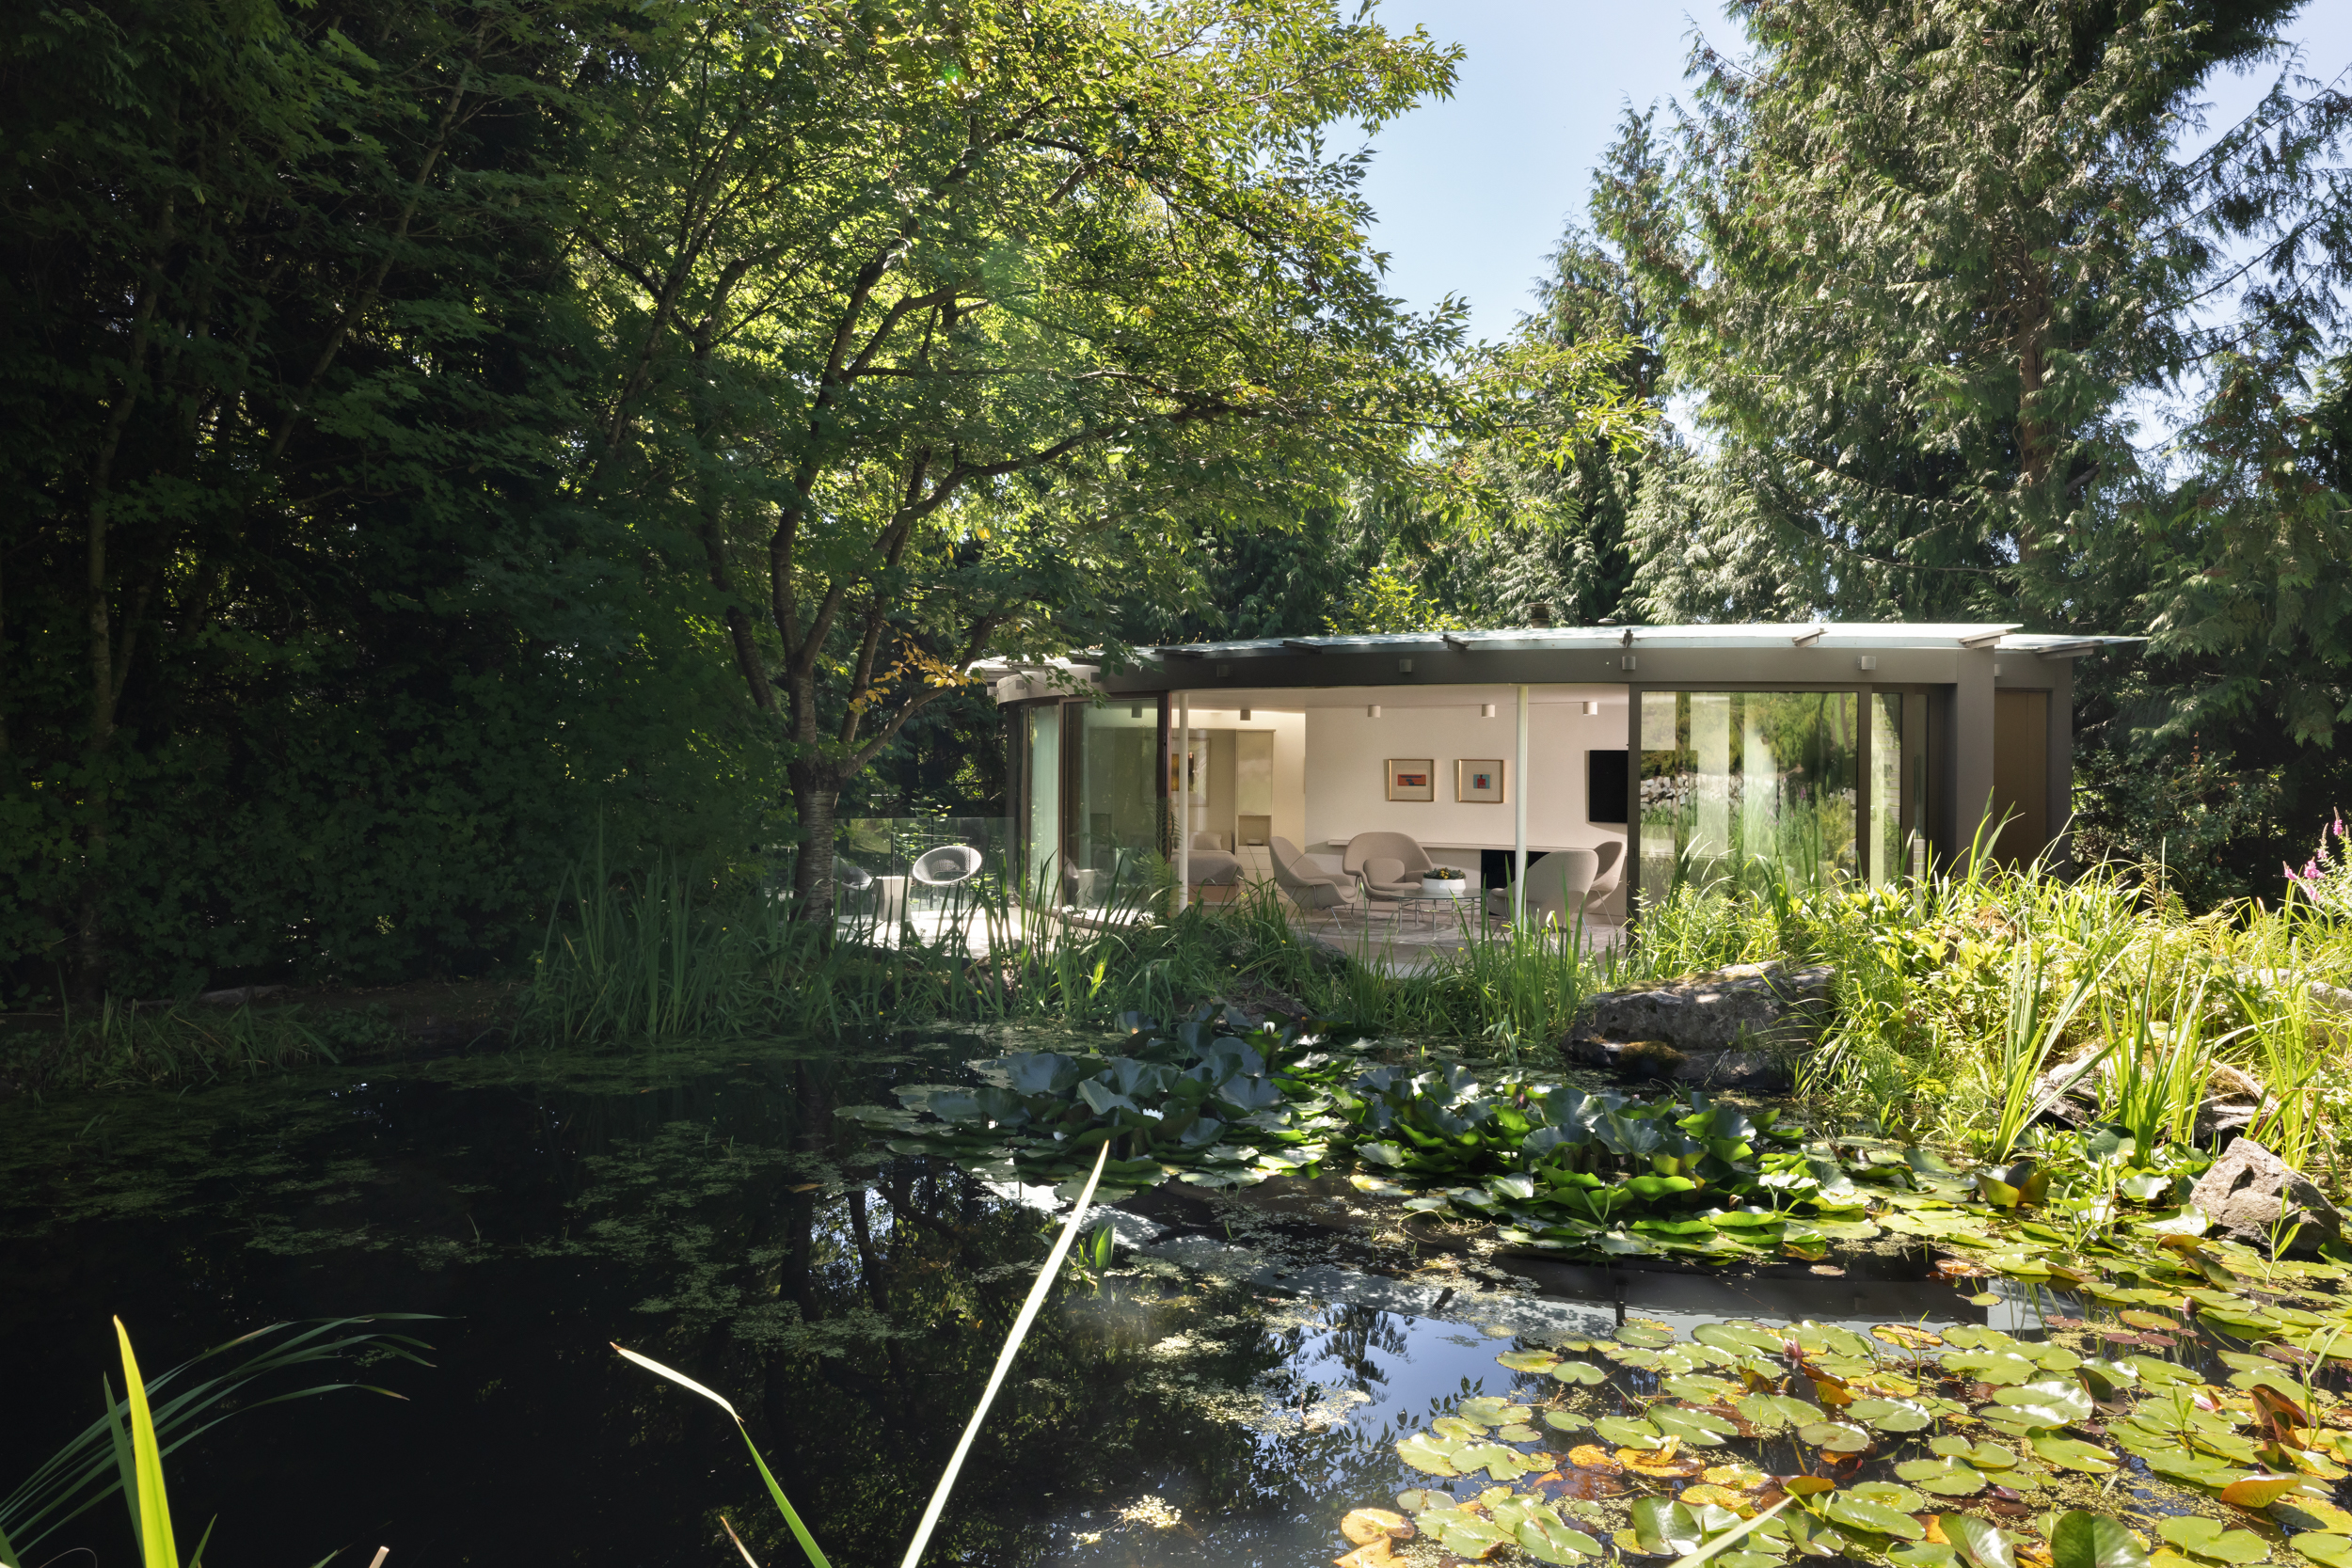 EPPICH HOUSE II - Iconic Arthur Erickson Home in the British Properties